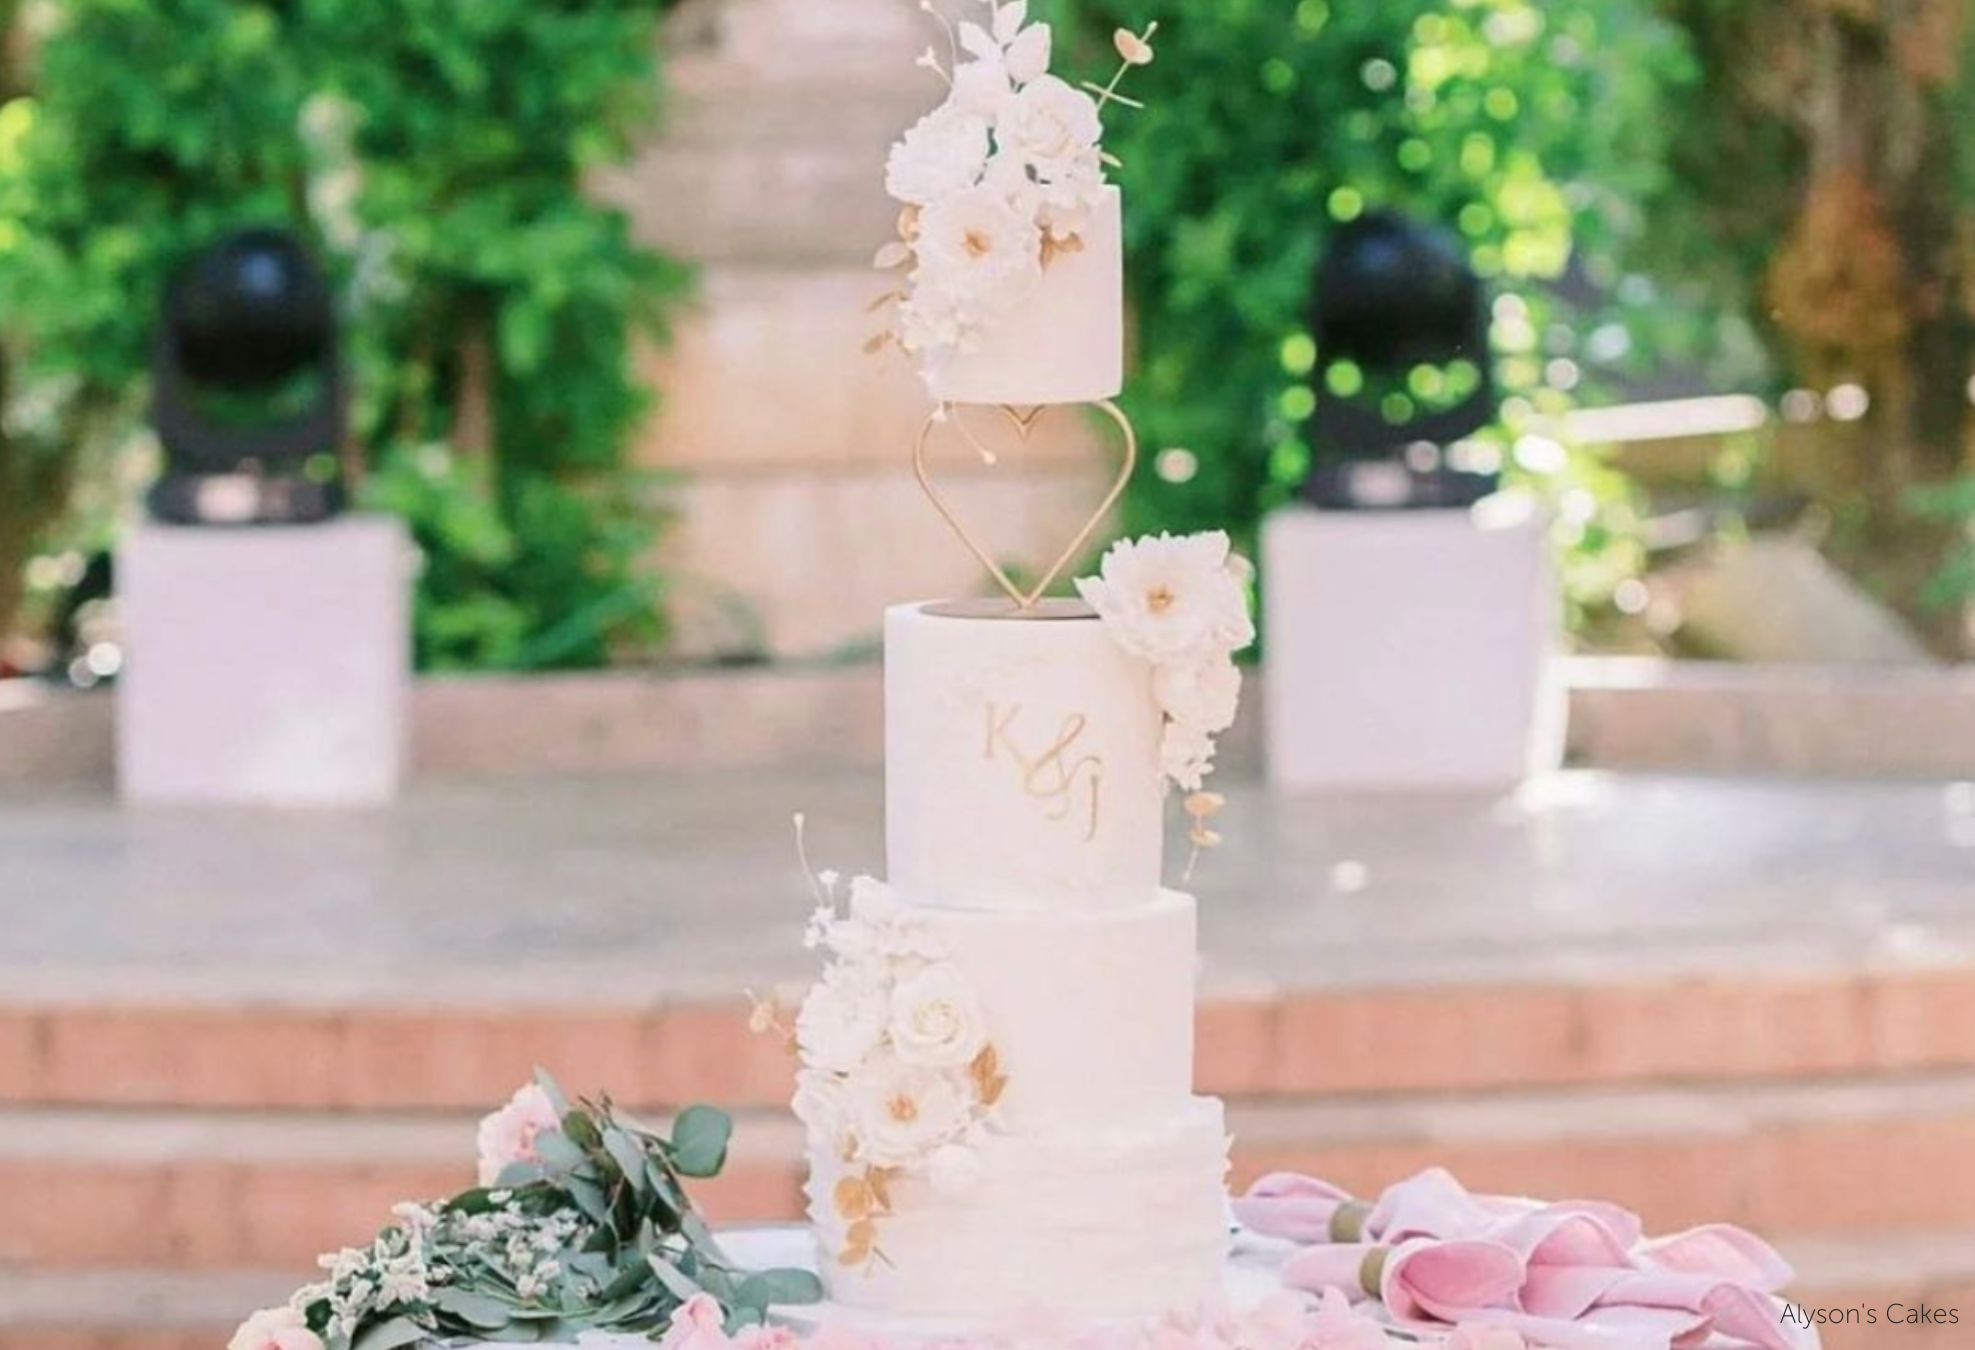 DIY Floral White Wedding Cake Separators | Good Morning 🌹🌹🌹 It's been a  few weeks since the last #caketutorialtuesday...😁😁😁 For this week's  #CakeTutorialTuesday let's create some DIY Floral Cake... | By Stemmac Cakes  | Facebook